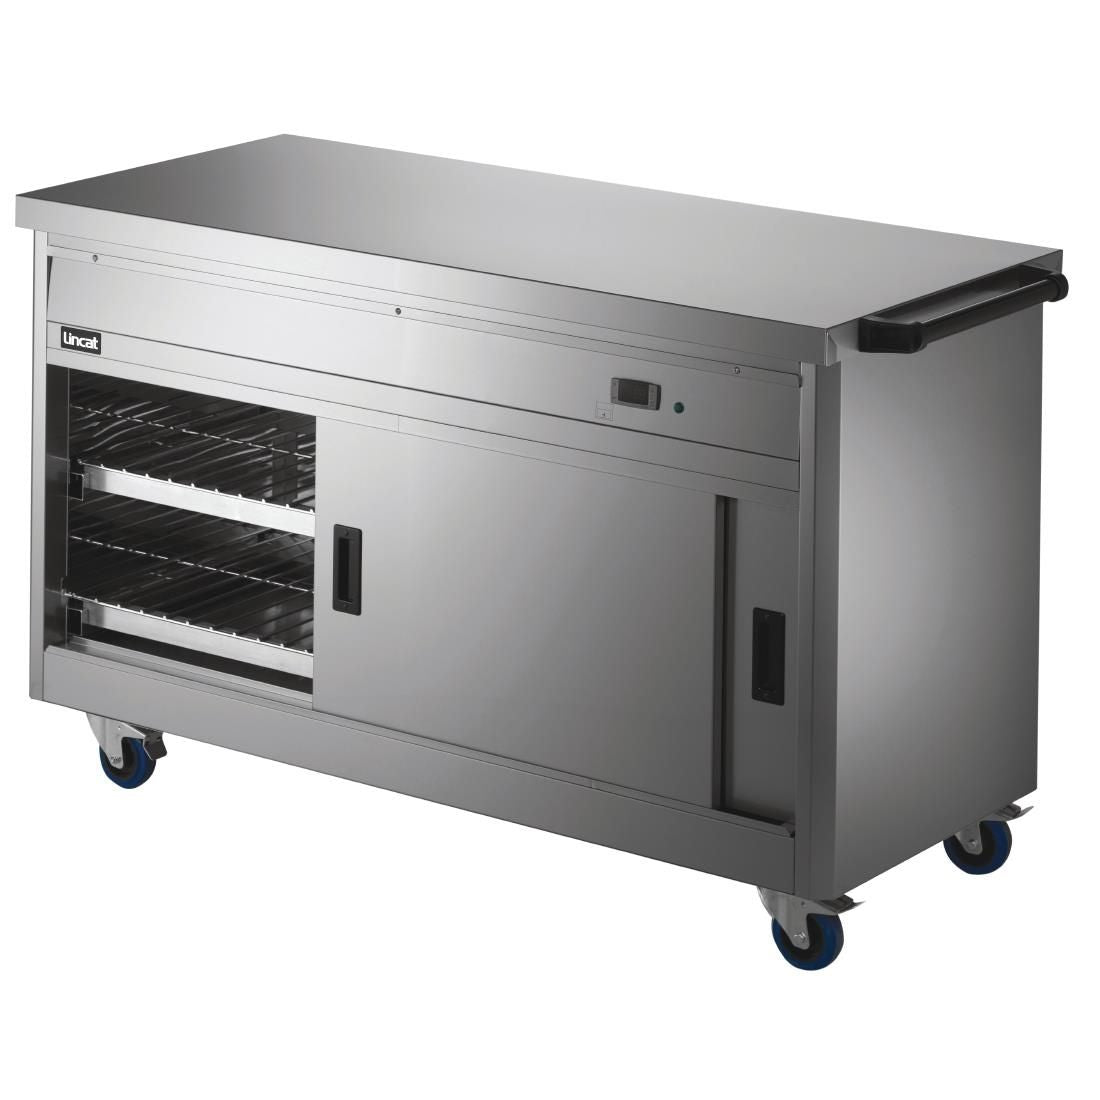 GJ572 Lincat Panther 670 Series Hot Cupboard with Plain tops P6P4 JD Catering Equipment Solutions Ltd